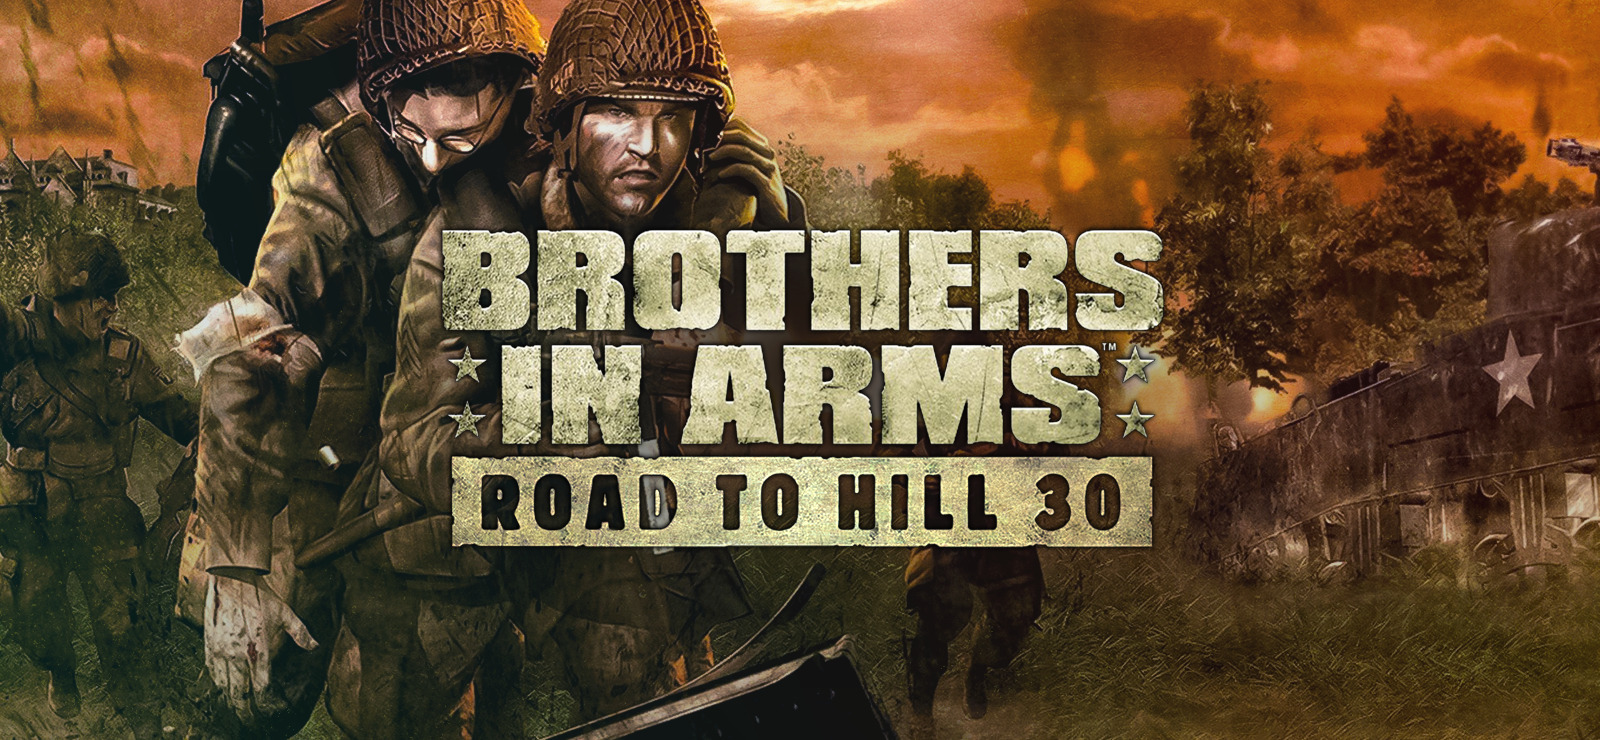 brothers-in-arms-road-to-hill-30-free-download-v1-11-gog-unlocked